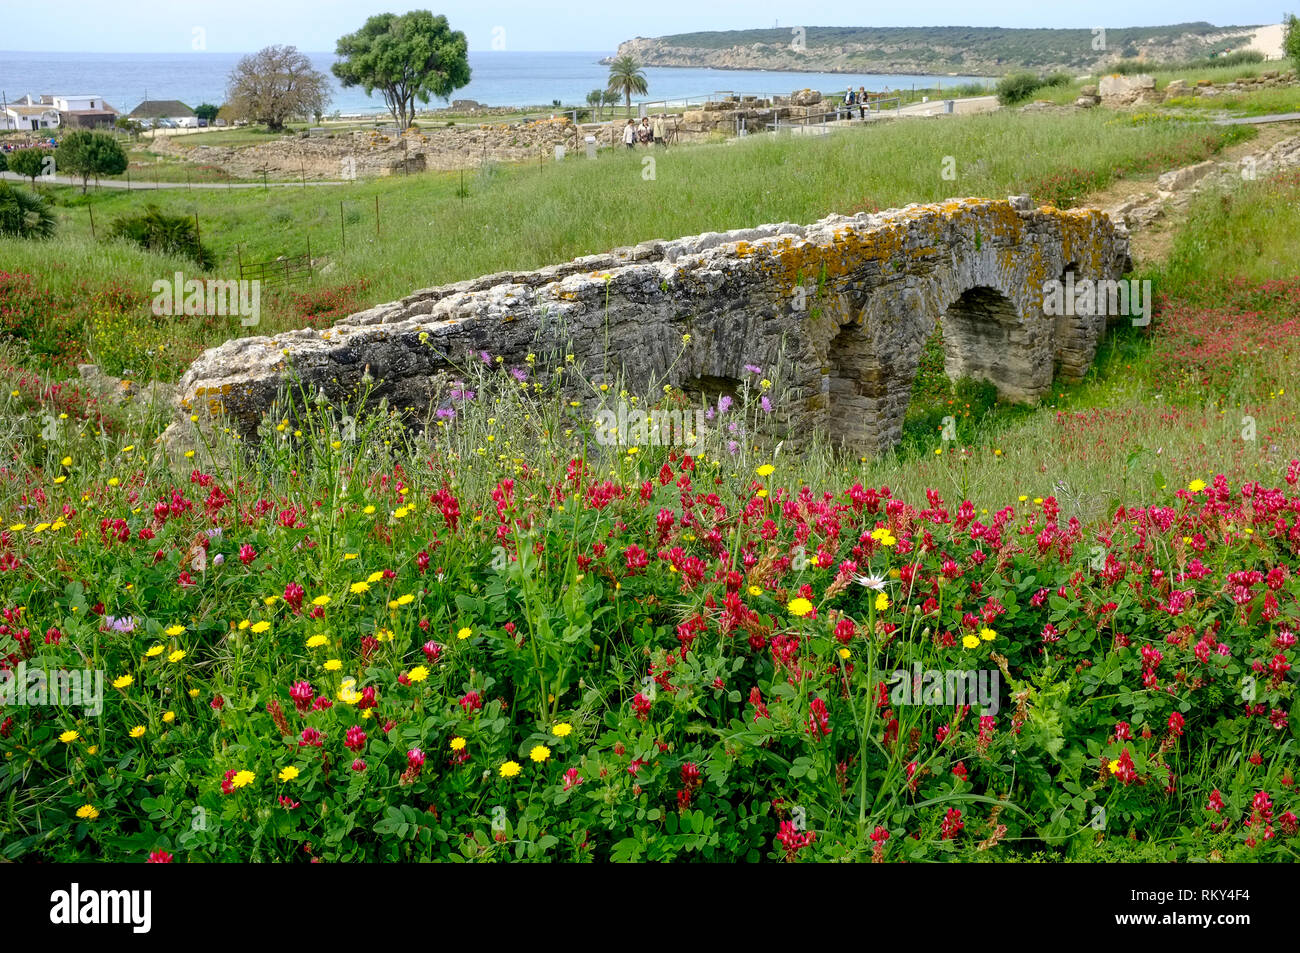 A view of the lush wild flower meadow and Roman ruins of Baelo Claudia, behind the beach in Bolonia Bay, Costa de la Luz, Spain. Stock Photo